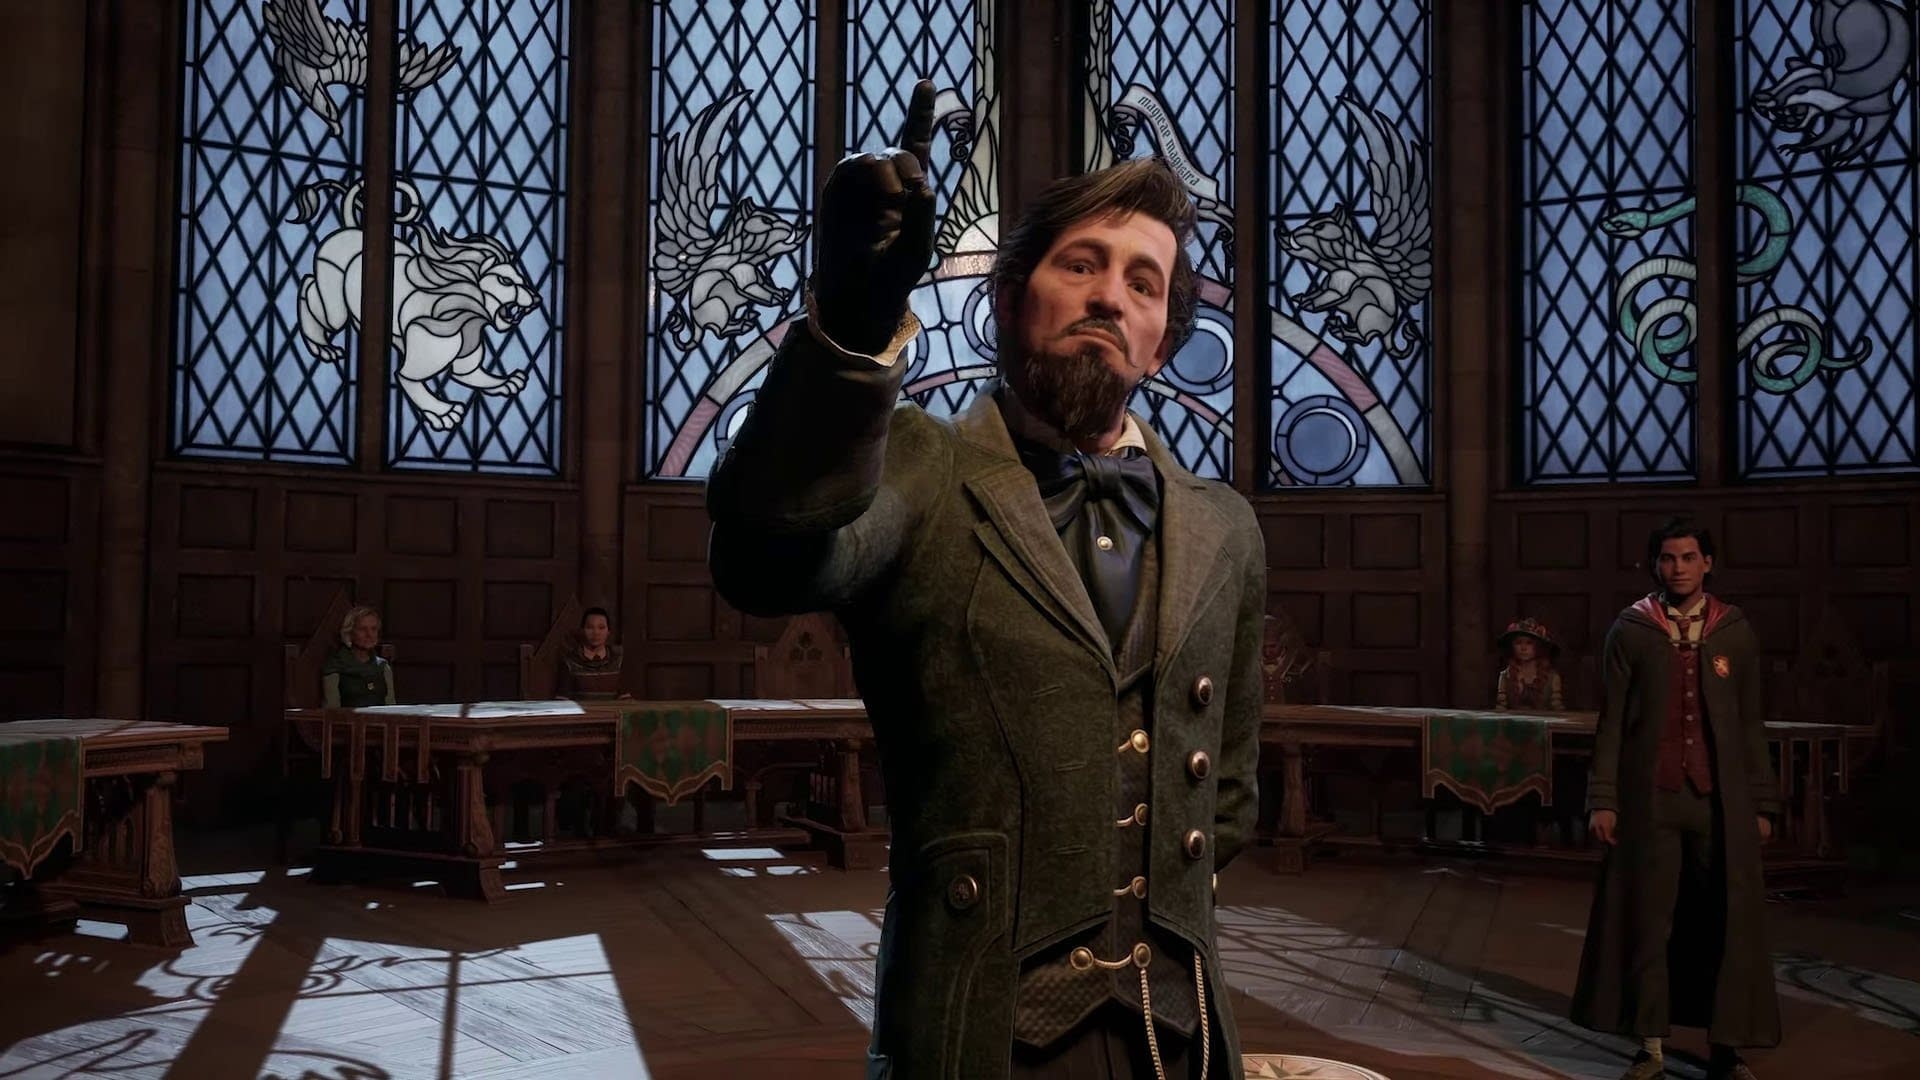 Voiceing Staff of Hogwarts Legacy Announced